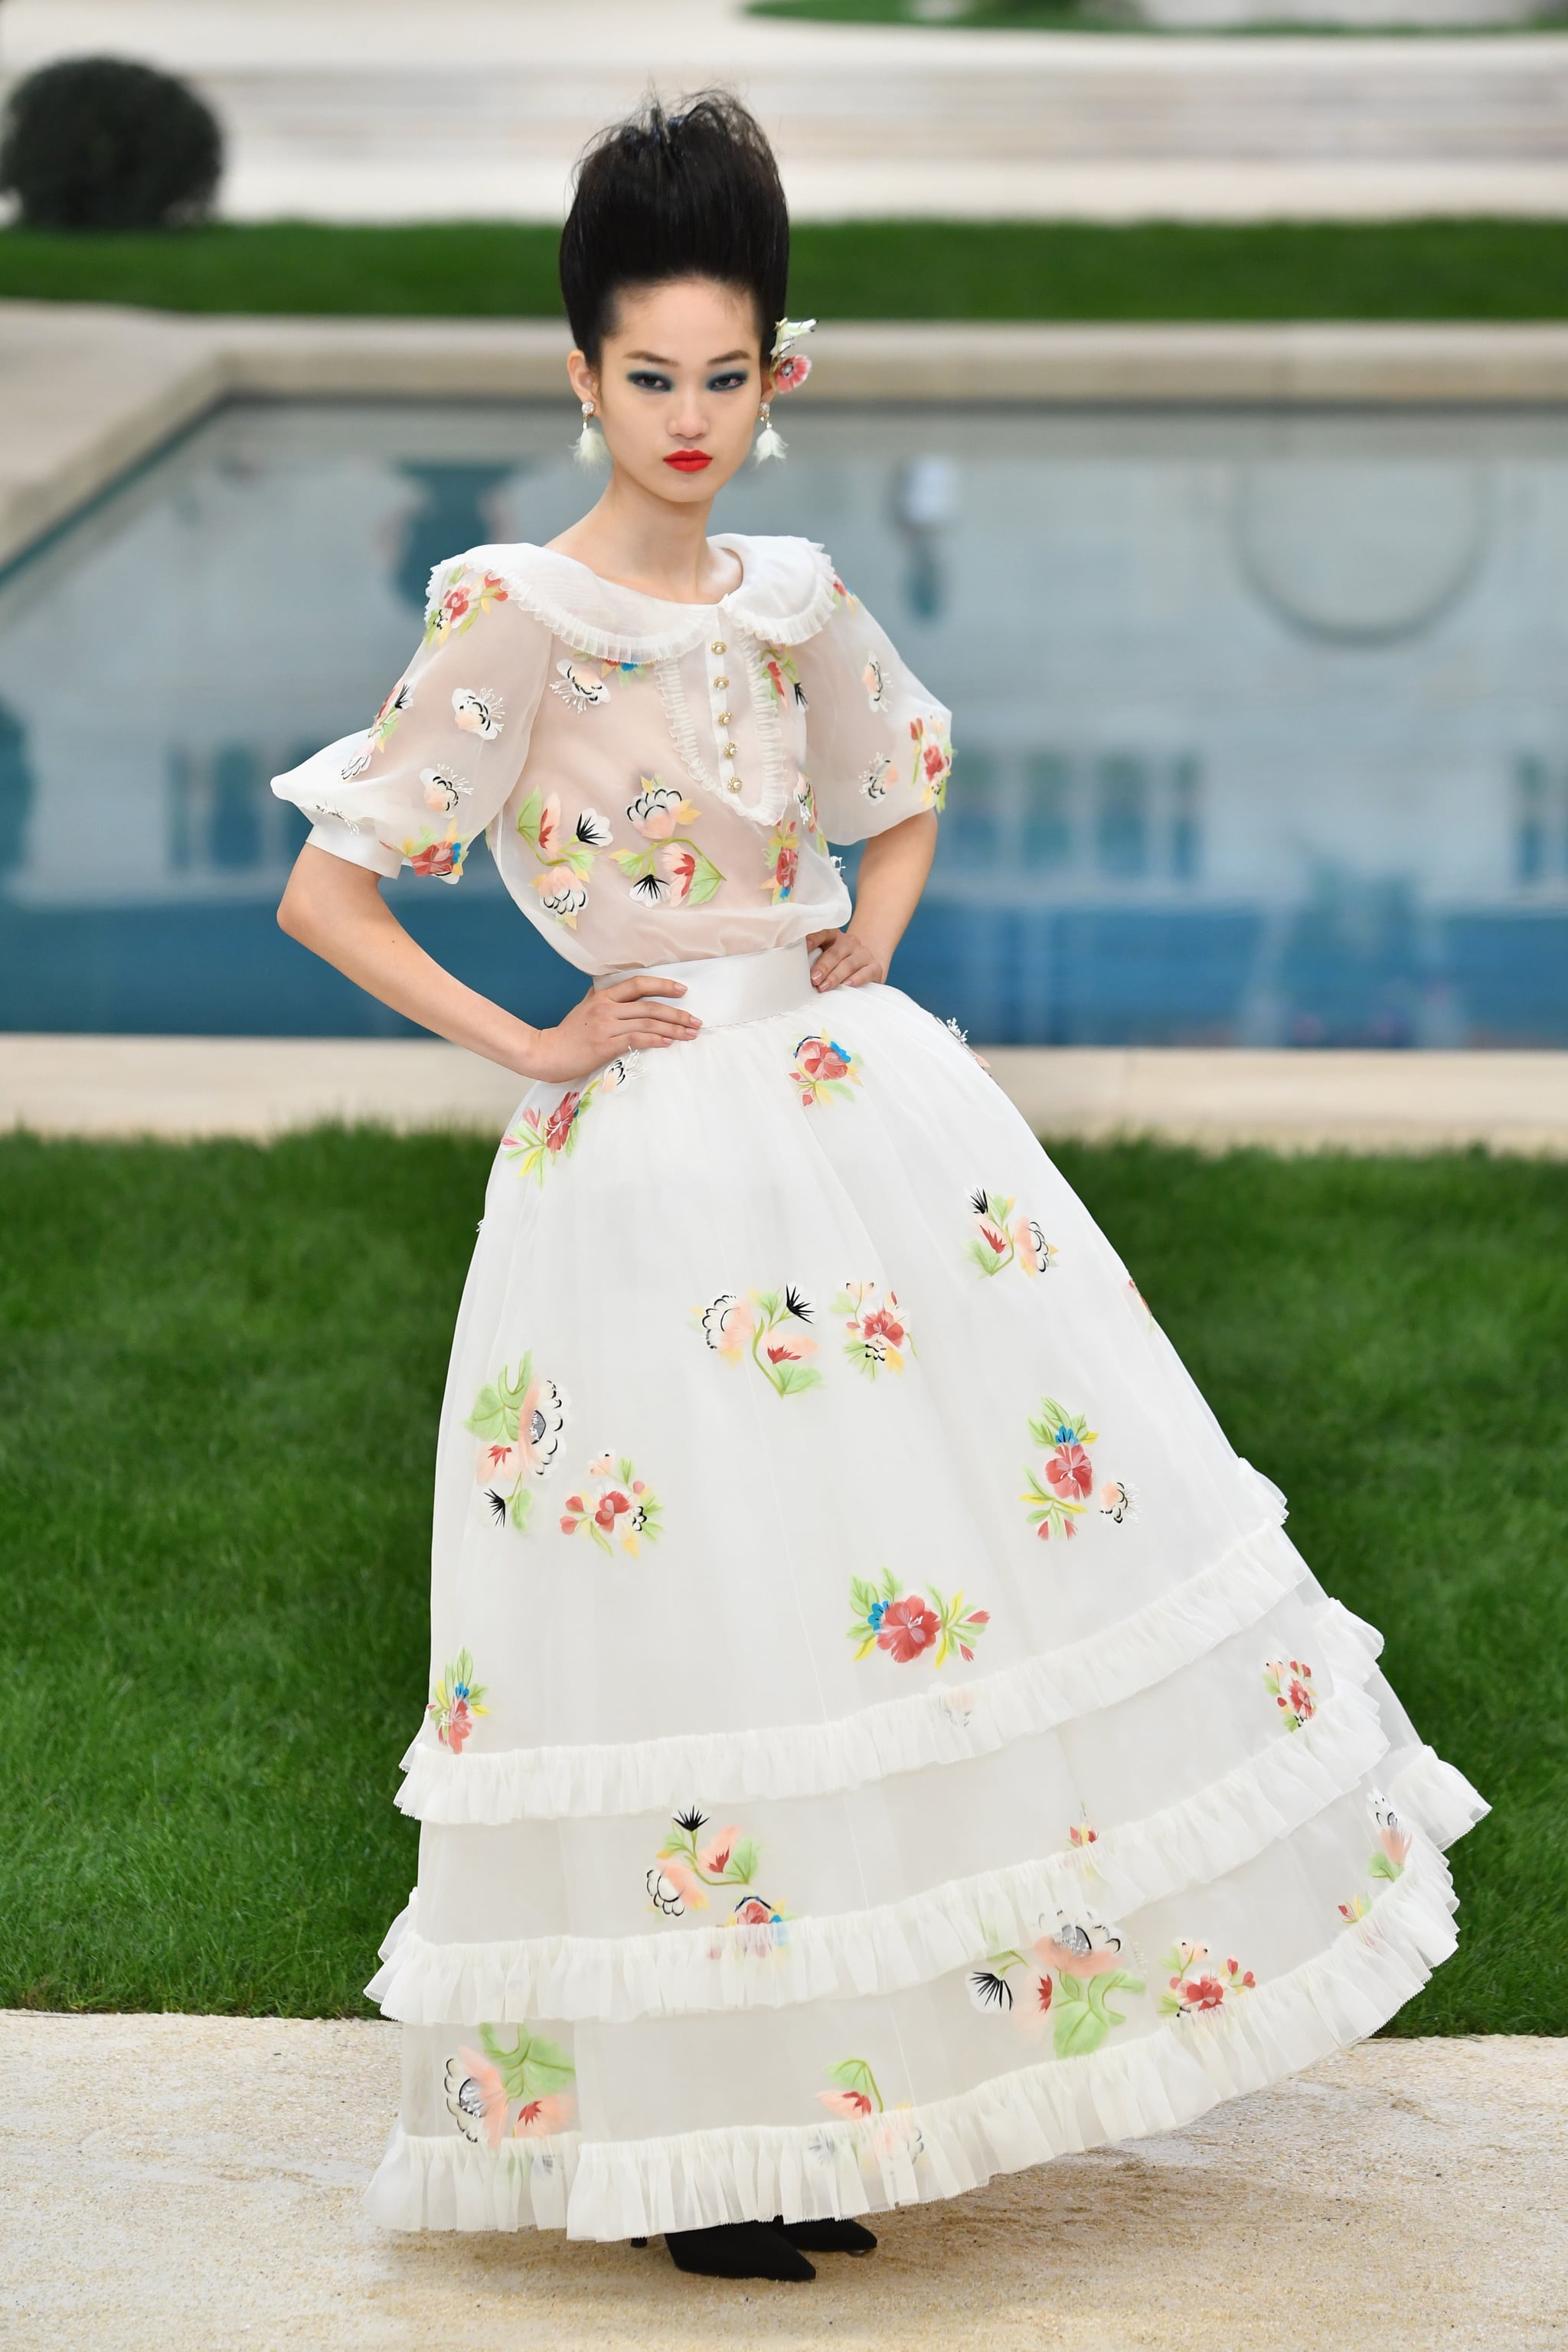 Couture Fashion Week January 2019 Best Dresses